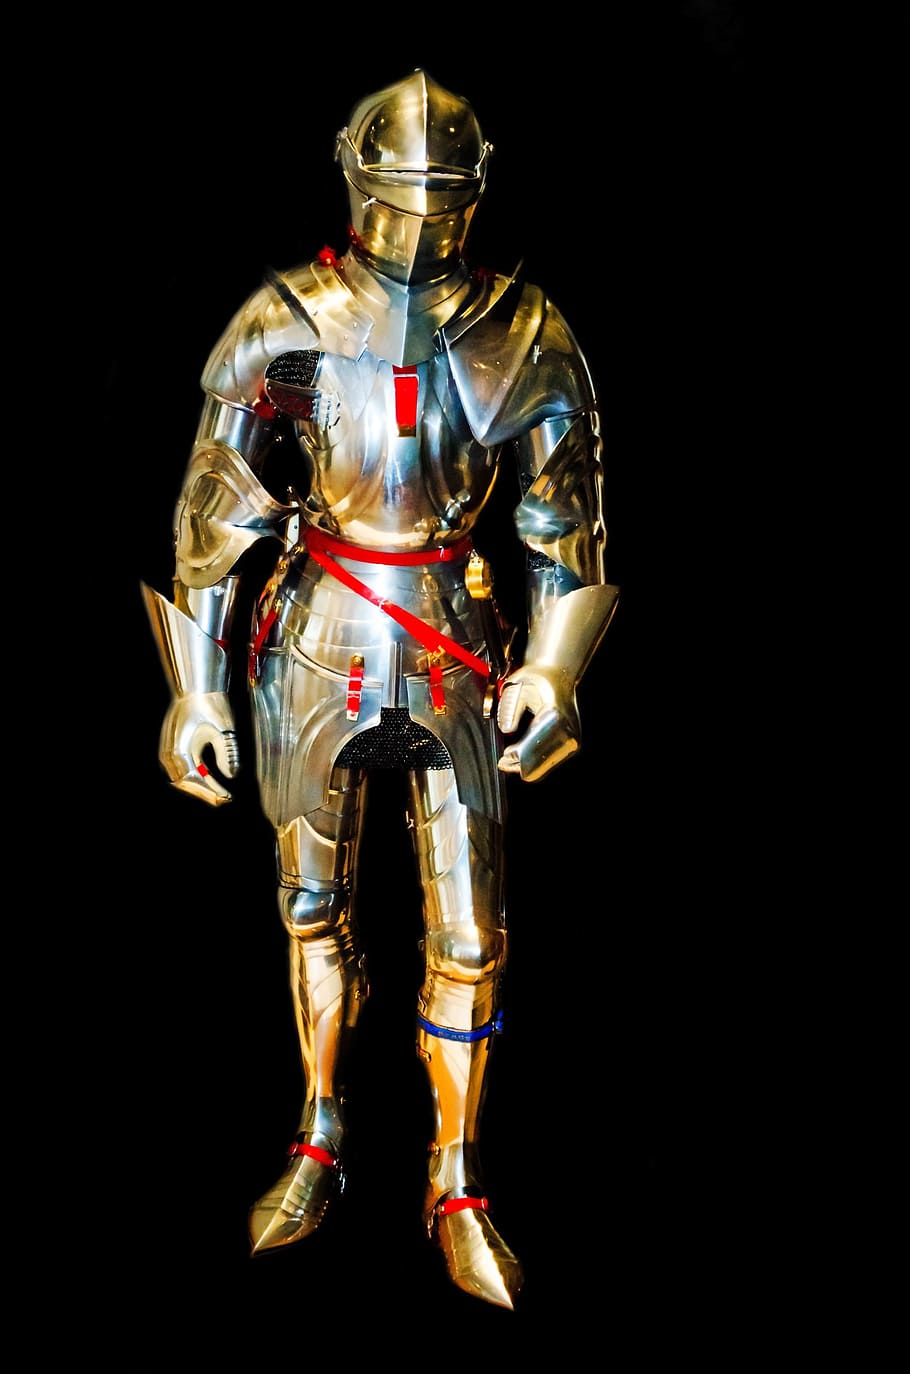 gold gladiator armor, knight, armor, armored, protection, steel, history, old, helmet, museum